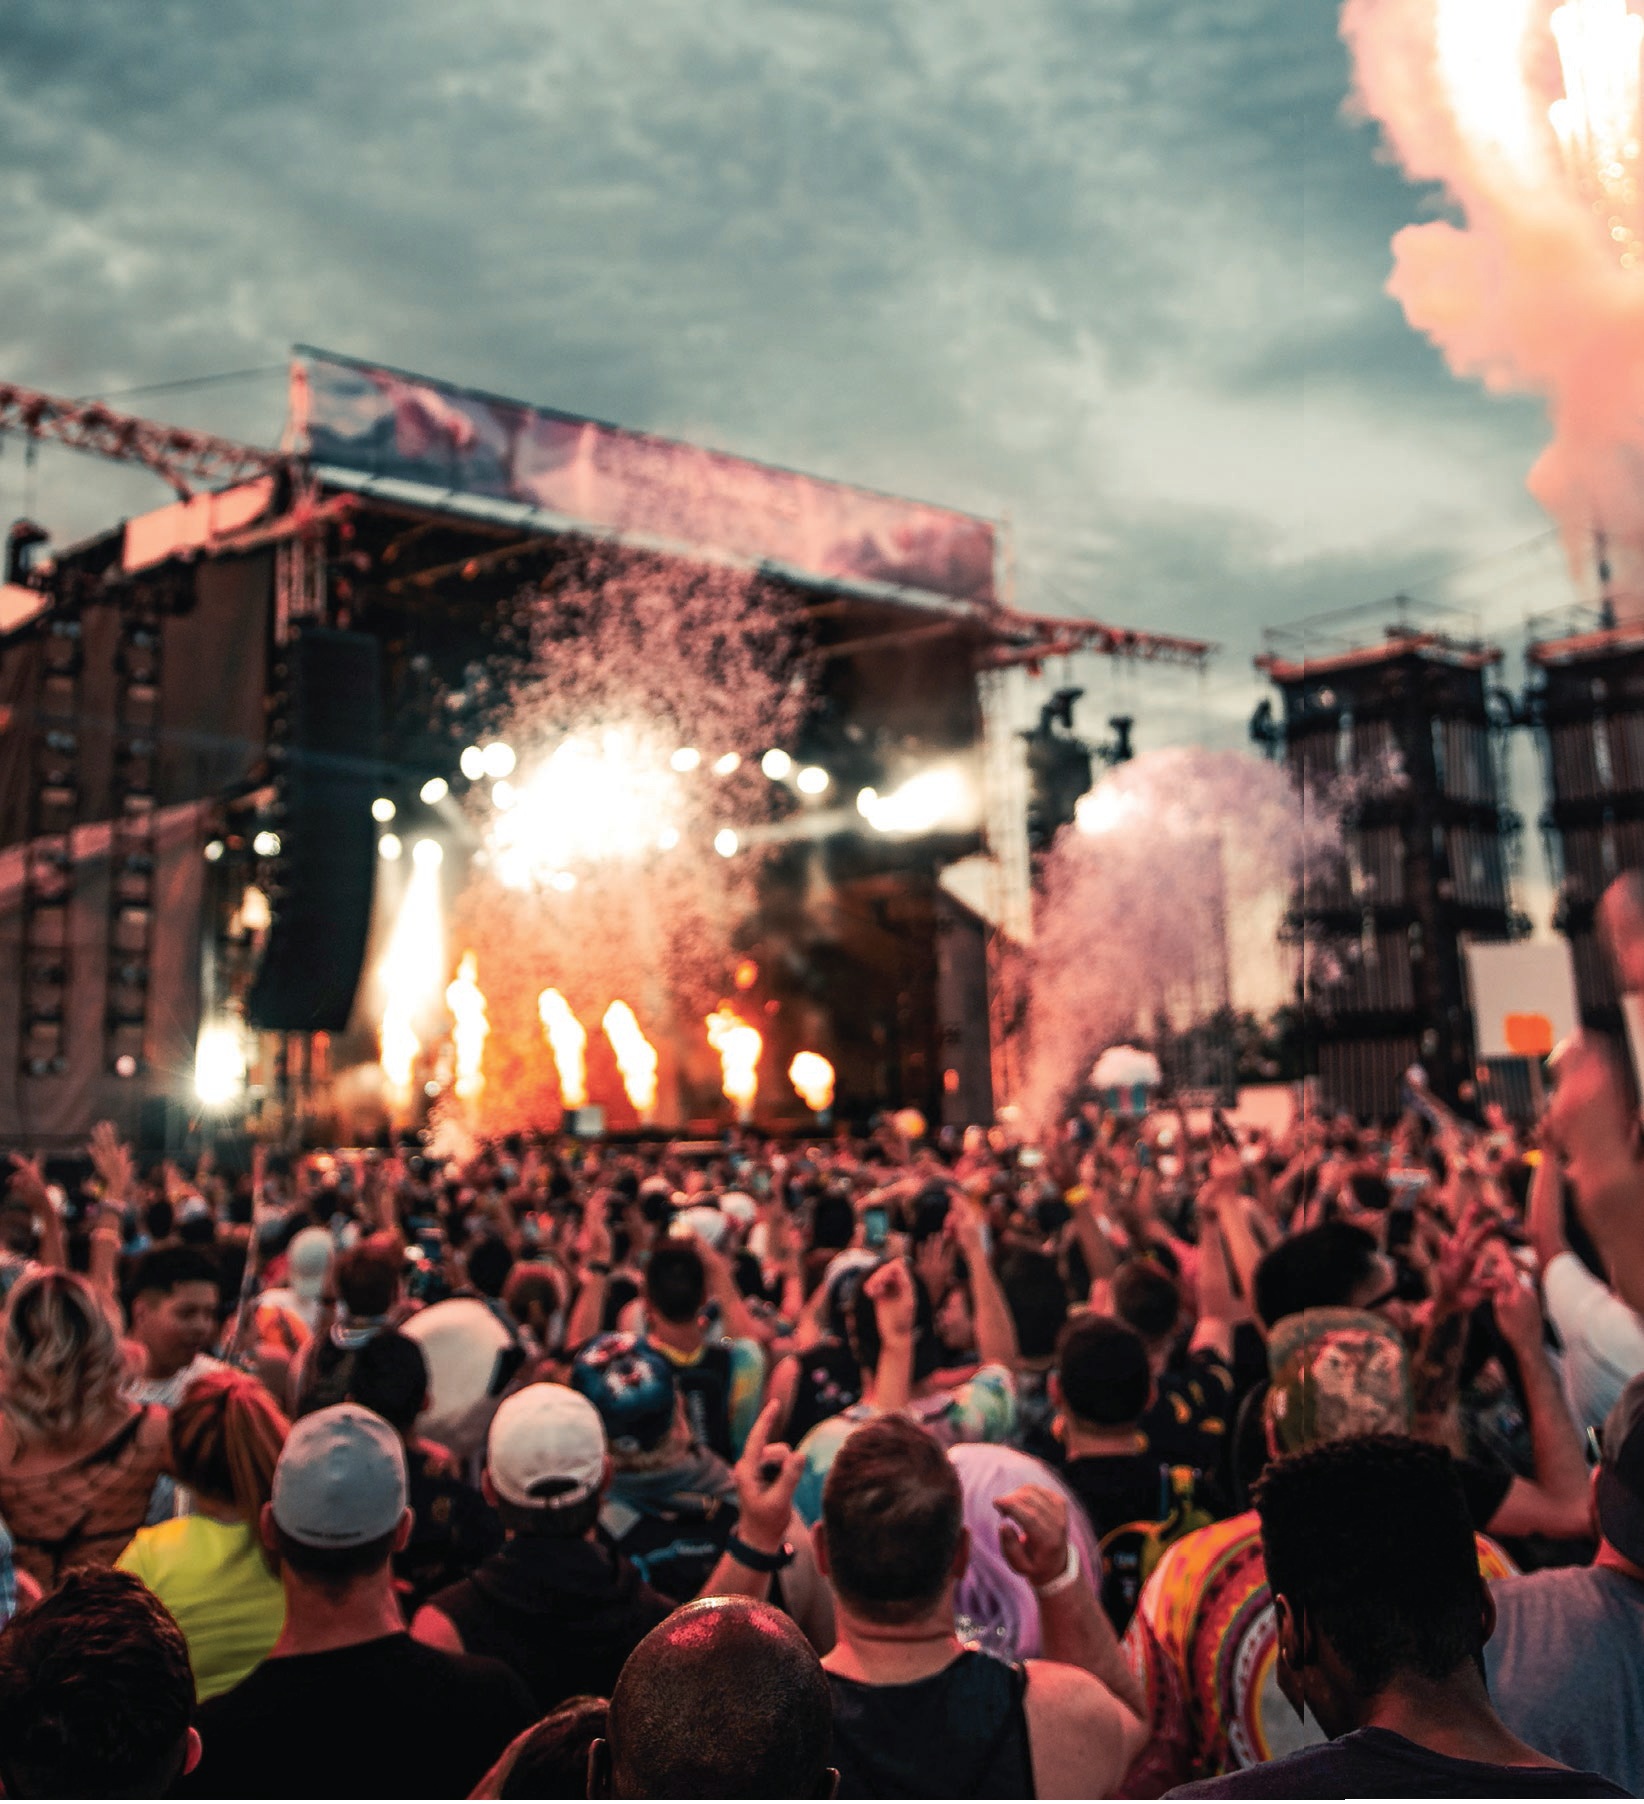 Boston Calling is finally returning to the Harvard Athletic Complex after a two-year hiatus. PHOTO BY COLIN LLOYD/UNSPLASH